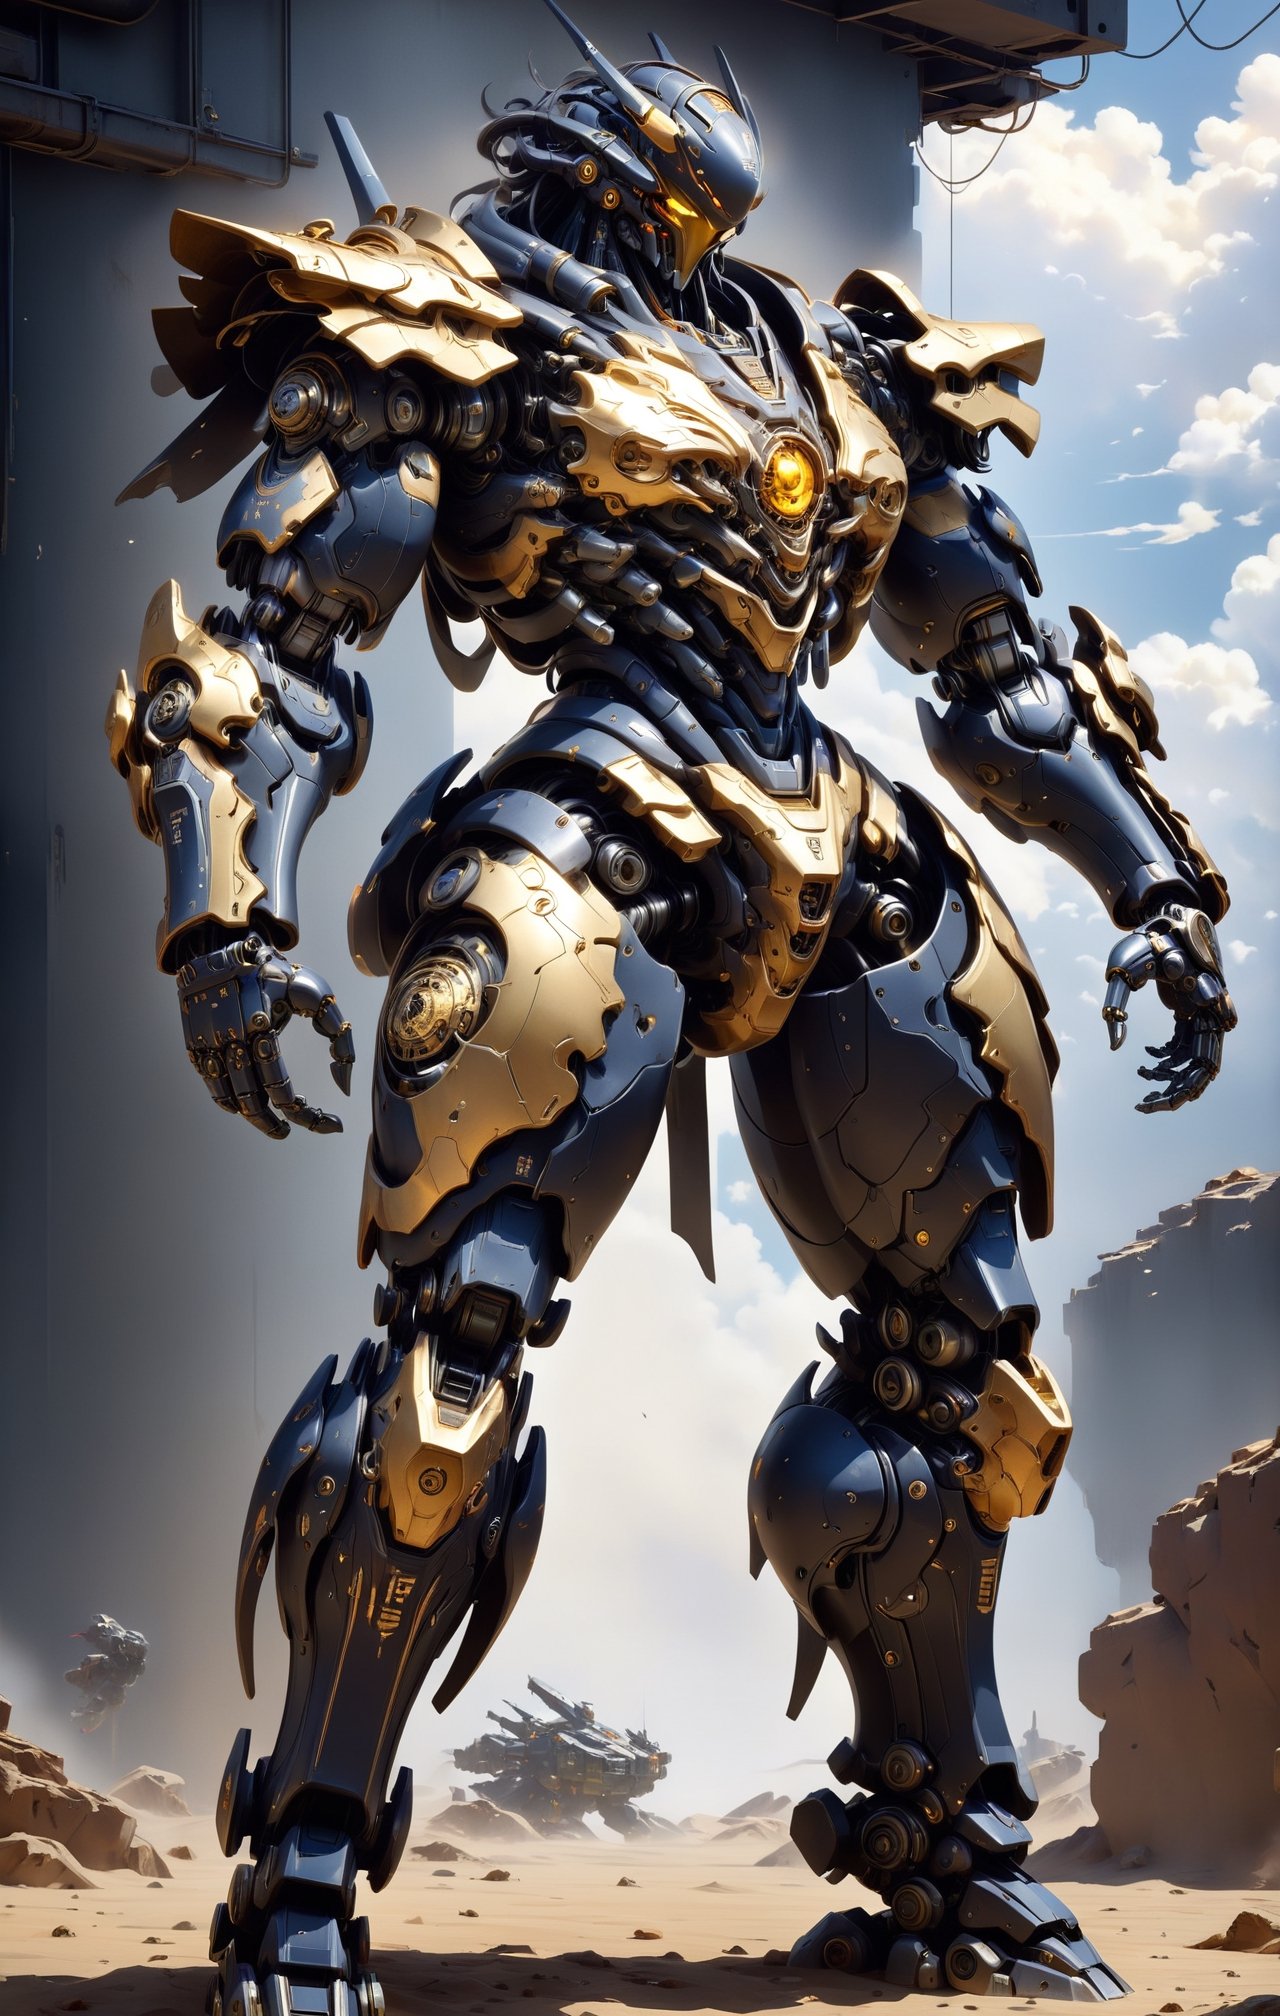 Create image of a detailed, mechanical robot design featuring a prominent deep blue and black color scheme with gold and yellow accents. The robot has complex armor plating with a sleek, non-organic aesthetic. Multiple layers and sections of armor show fine, intricate details, and the interplay of metallic surfaces gives off a reflective quality. Golden Japanese Kanji characters are prominently featured on the chest and various parts of the body, providing a striking contrast to the darker tones. The robot appears to be standing, with one arm slightly raised and the hand gripping a part of its chest armor, which suggests dynamic motion. The background is a blurred sky with clouds that suggest an outdoor setting, with light predominantly coming from above, casting subtle shadows across the robot's form. The use of light and shadow accentuates the three-dimensional aspect of the subject. Some text, including "VEX" and "DOMINATOR," is written on the armor in smaller print, contributing to the militaristic look. nvidia rtx, super-resolution, unreal 5, subsurface scattering, pbr texturing, 32k UHD